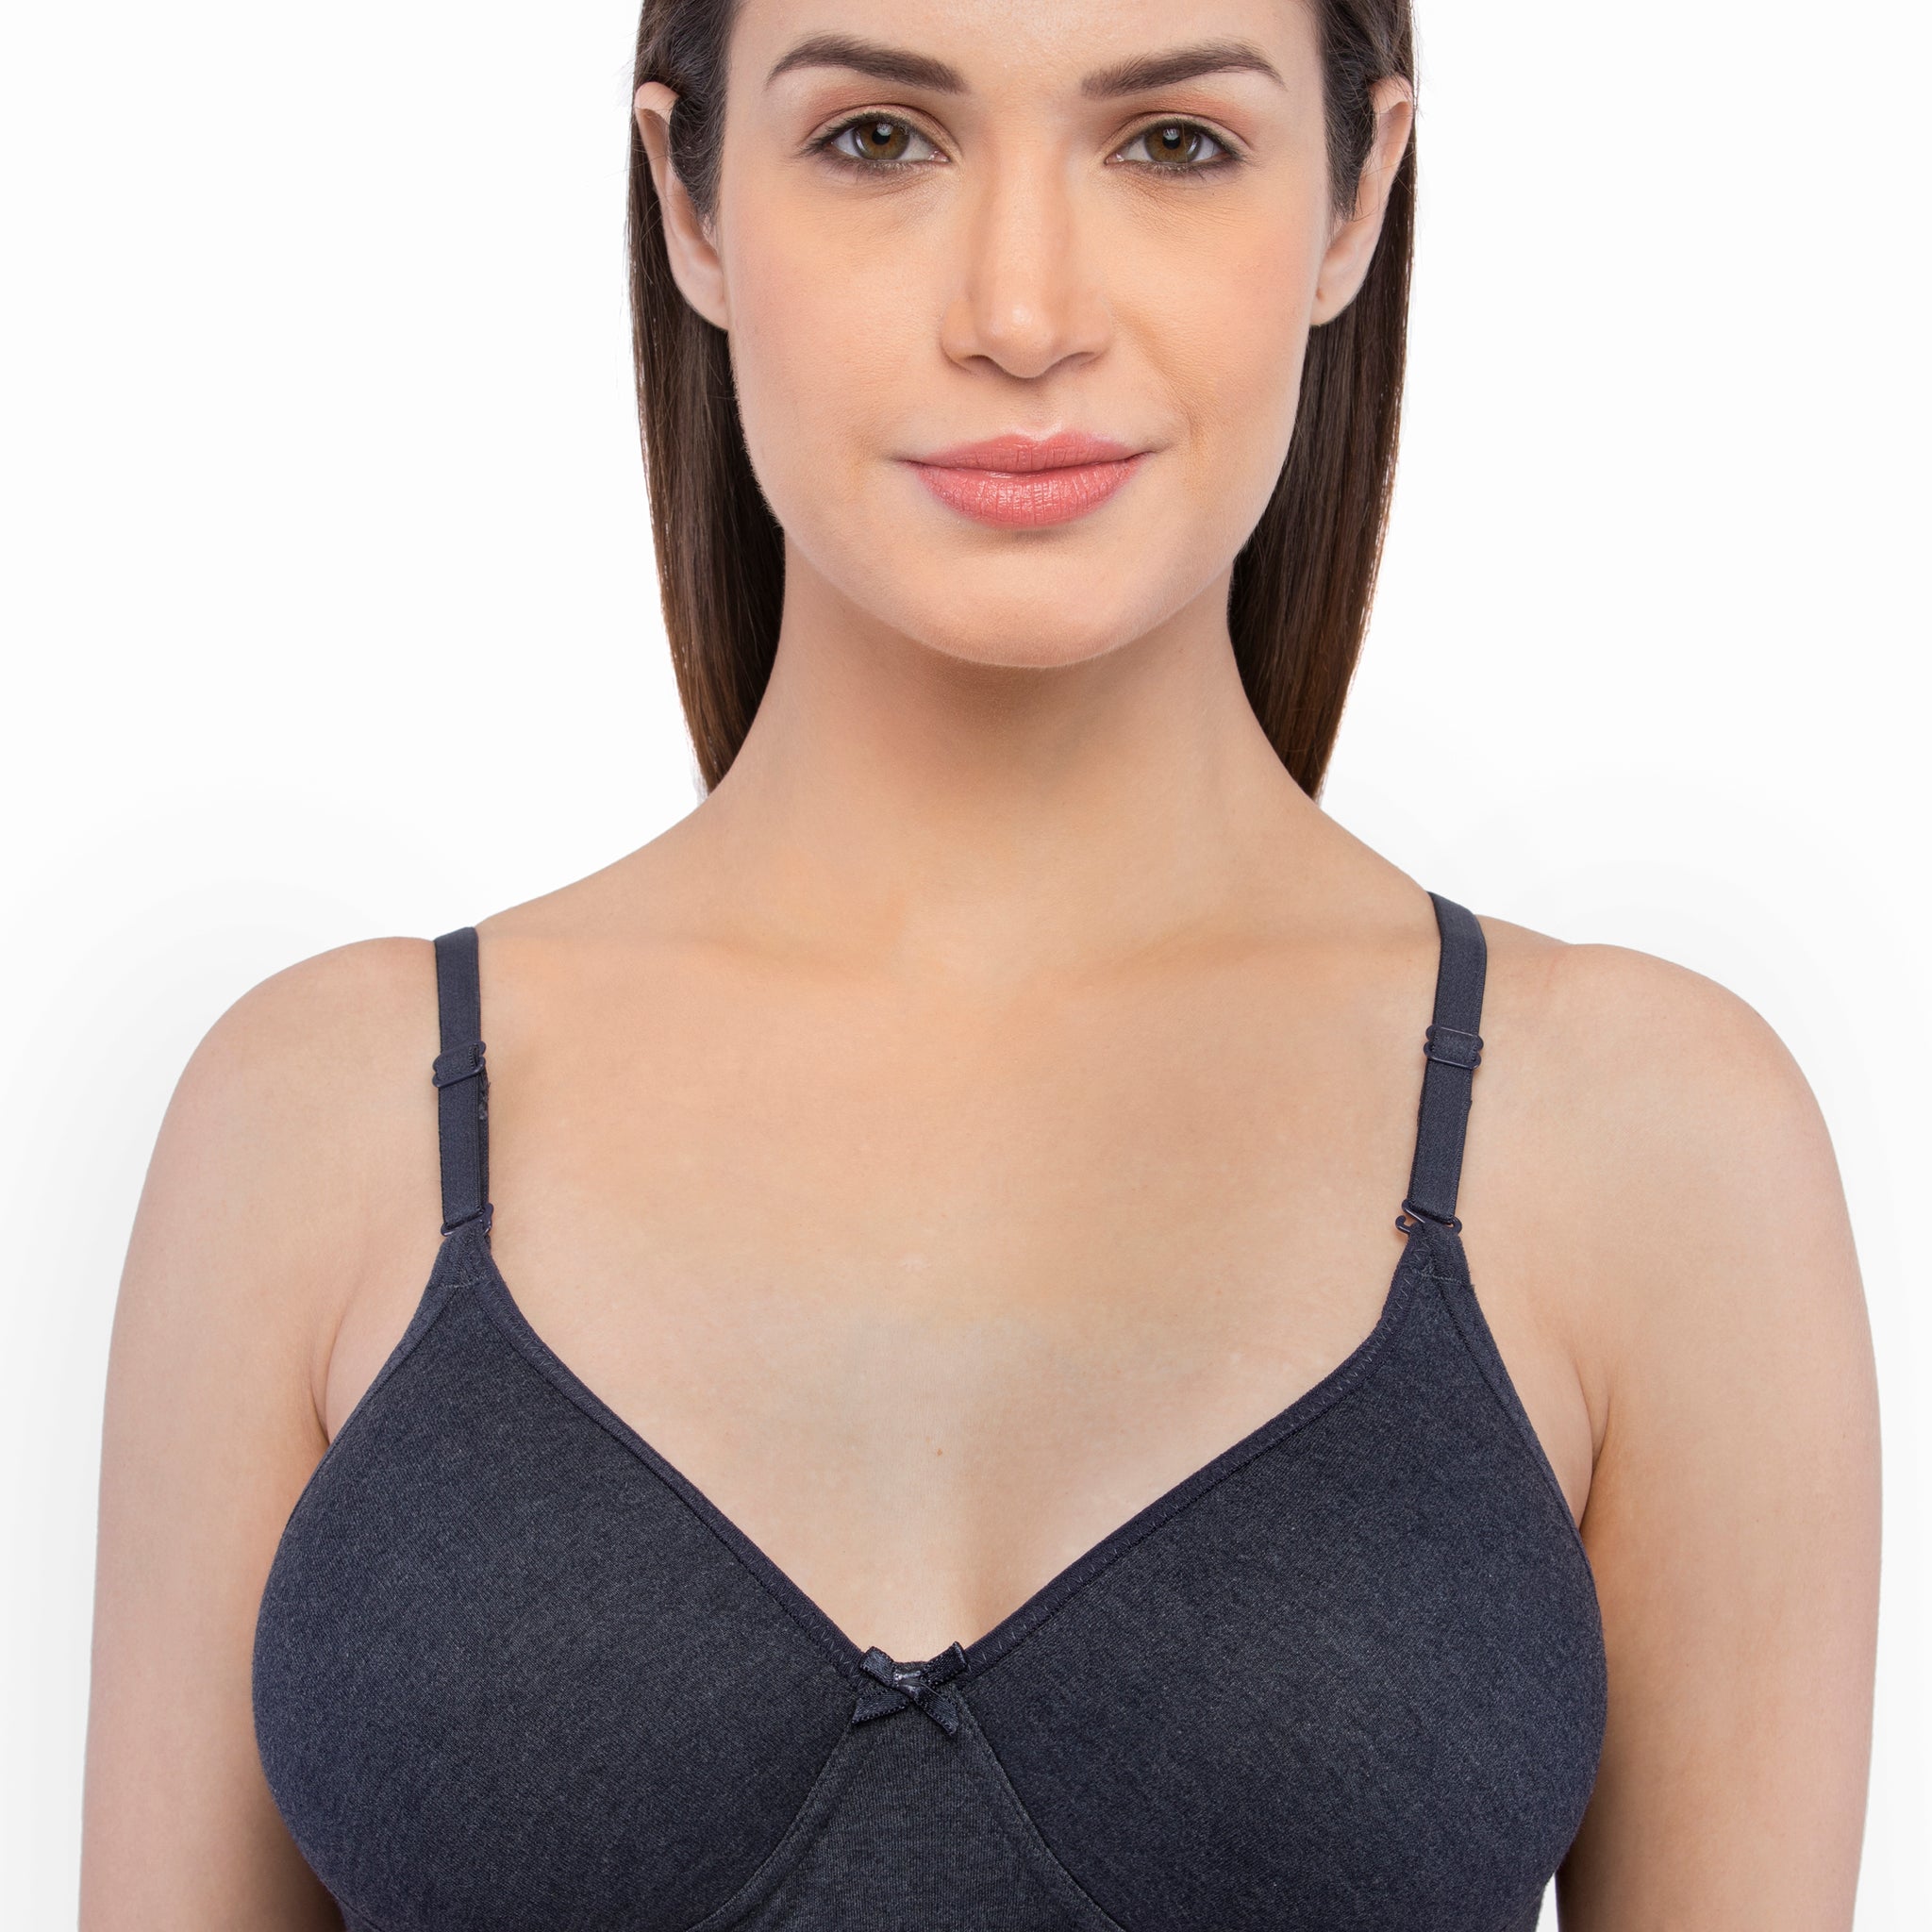 Buy FEELBLUE Comfort Women's Transparent Strap Non-Padded Non-Wired Cotton  Bra (Multicolour) - Combo Pack of 4 at